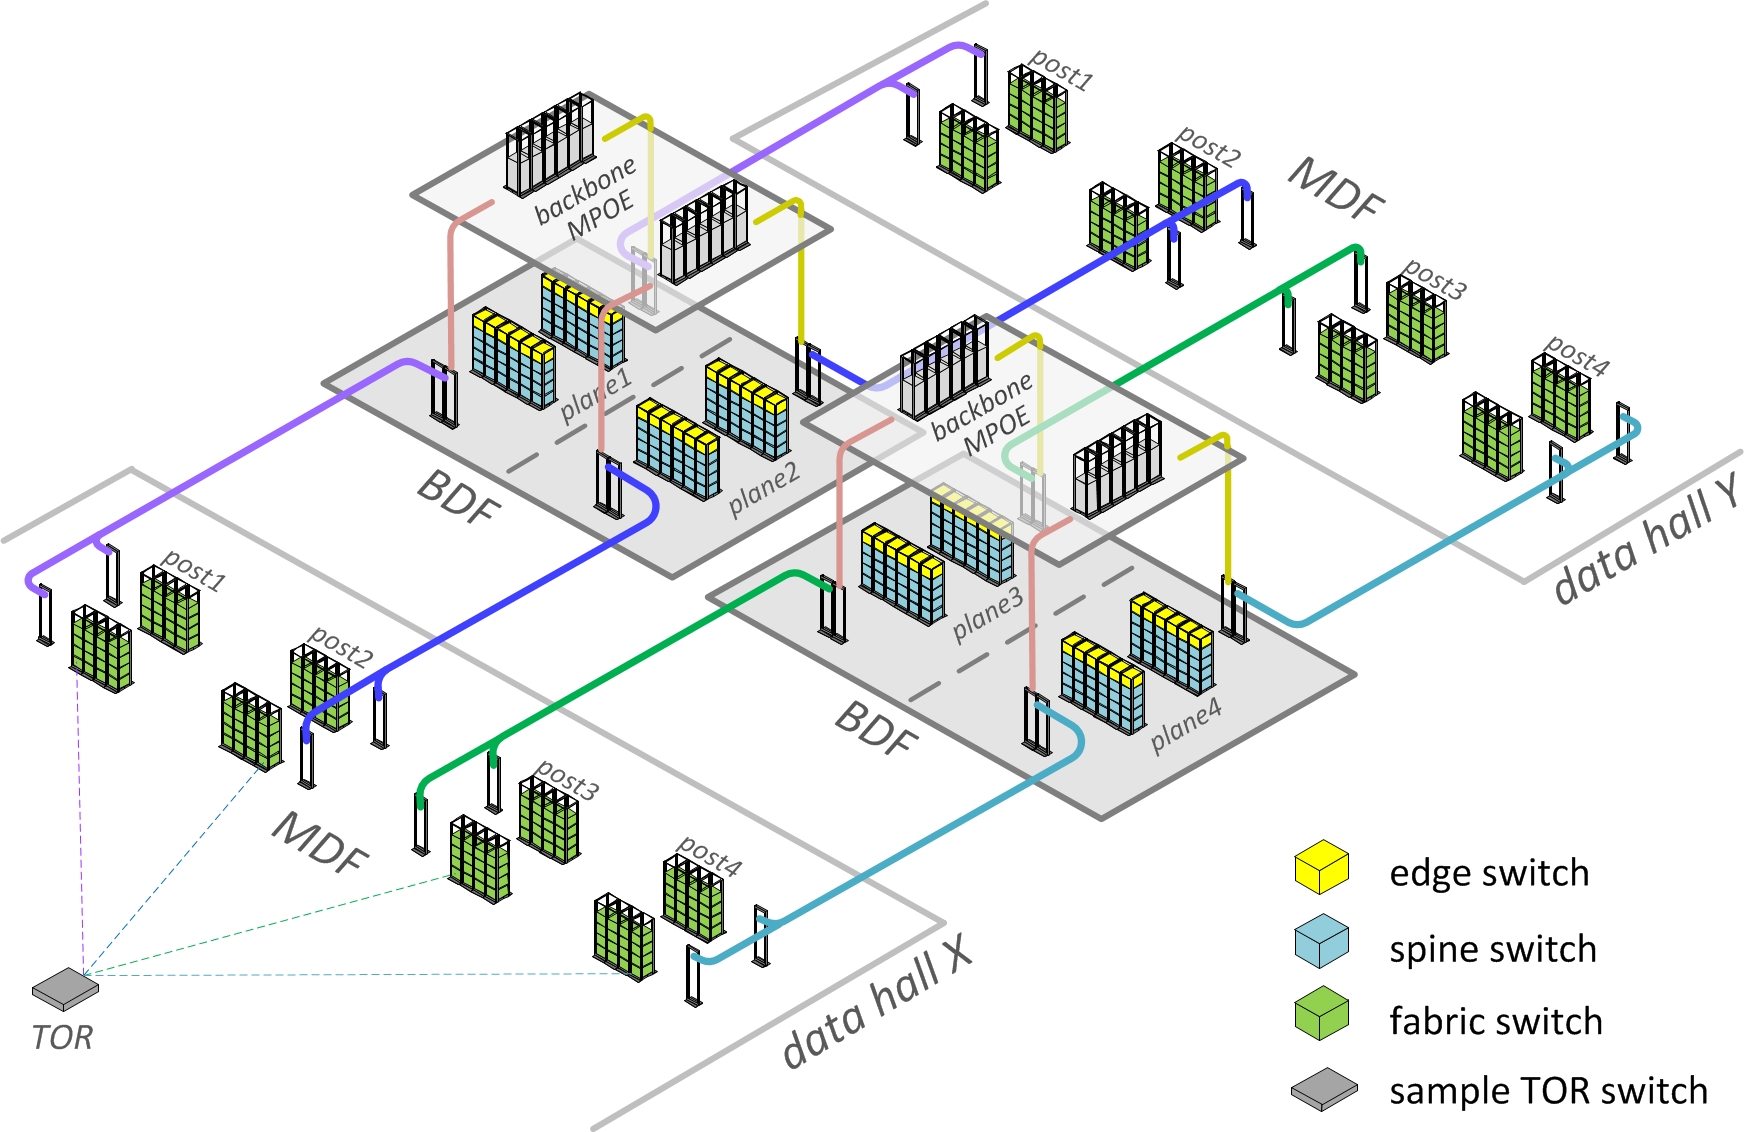 Schematic fabric-optimized Facebook datacenter physical topology.jpg